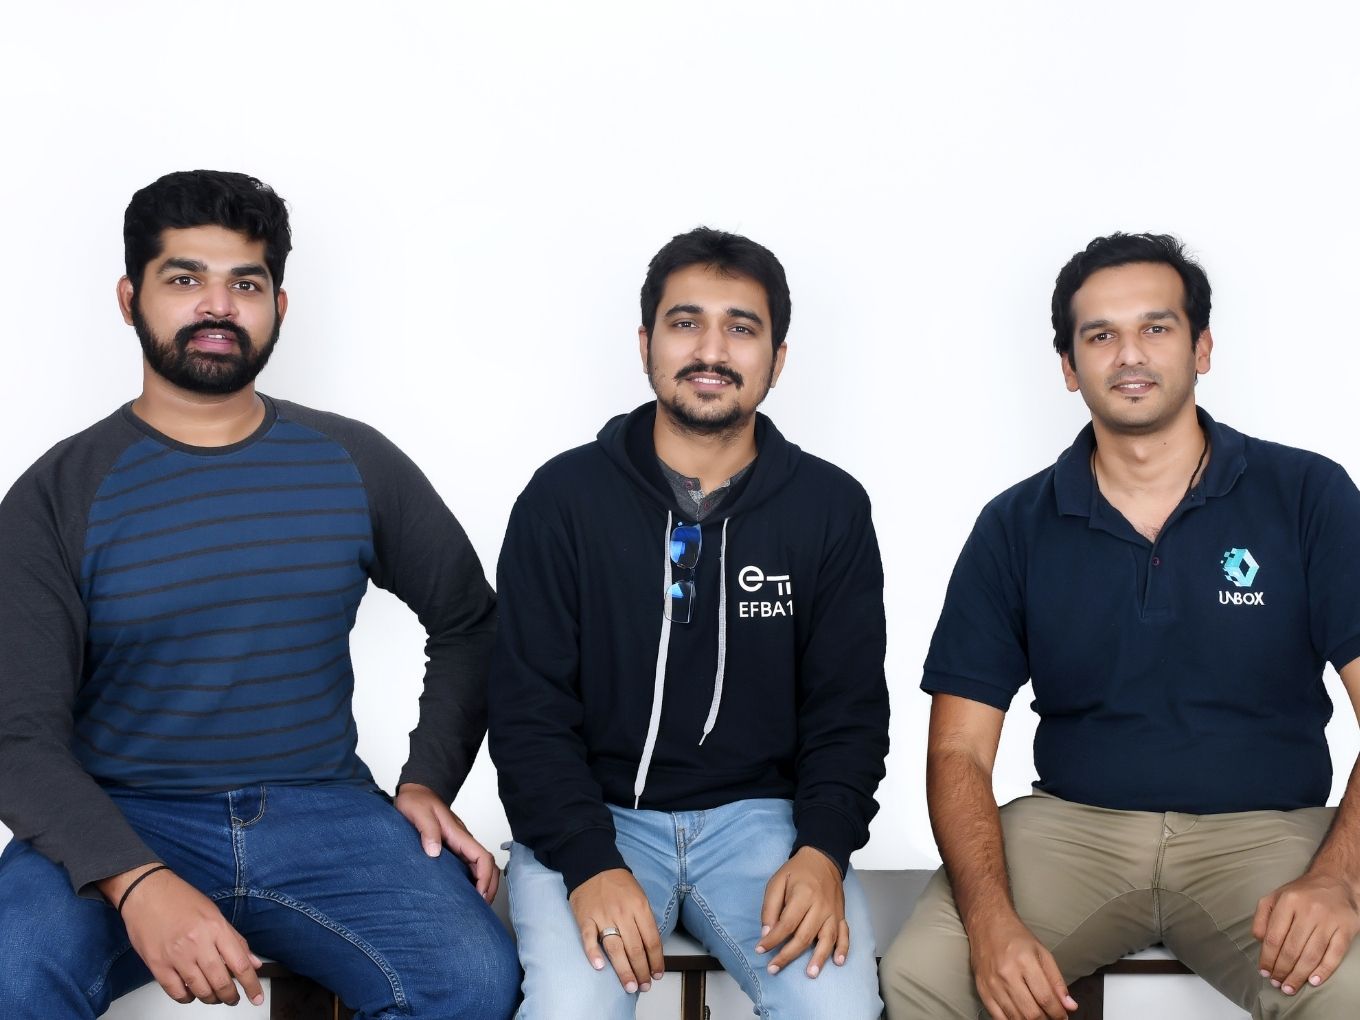 Unbox Bags $7 Mn To Build Compact Ecommerce Robotics Solutions